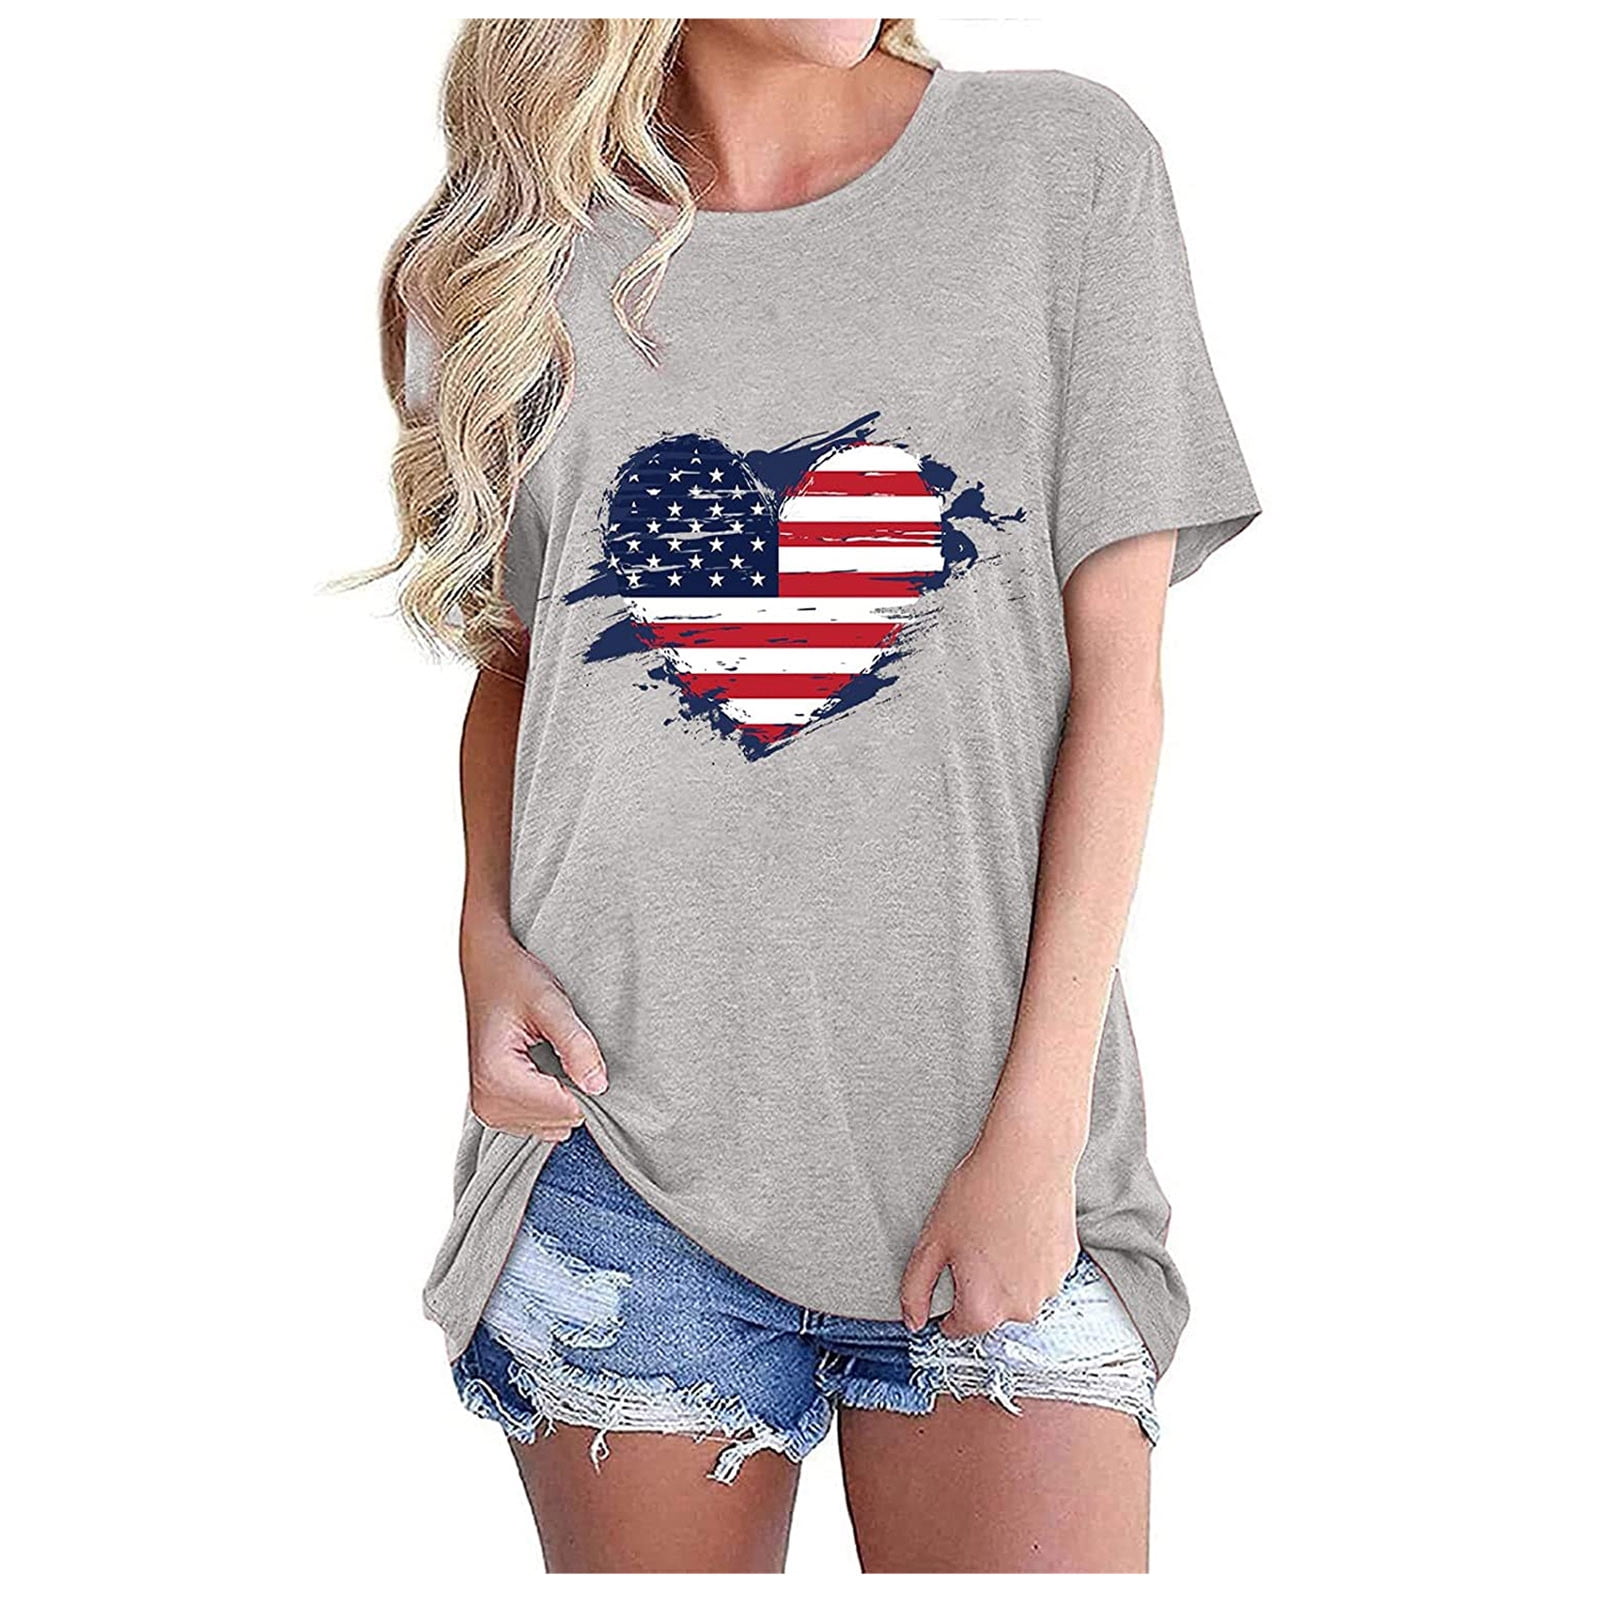 Tees for Womens Casual Crewneck Loose Tshirts American Flag Tunic 4th of July Short Sleeve Tops 